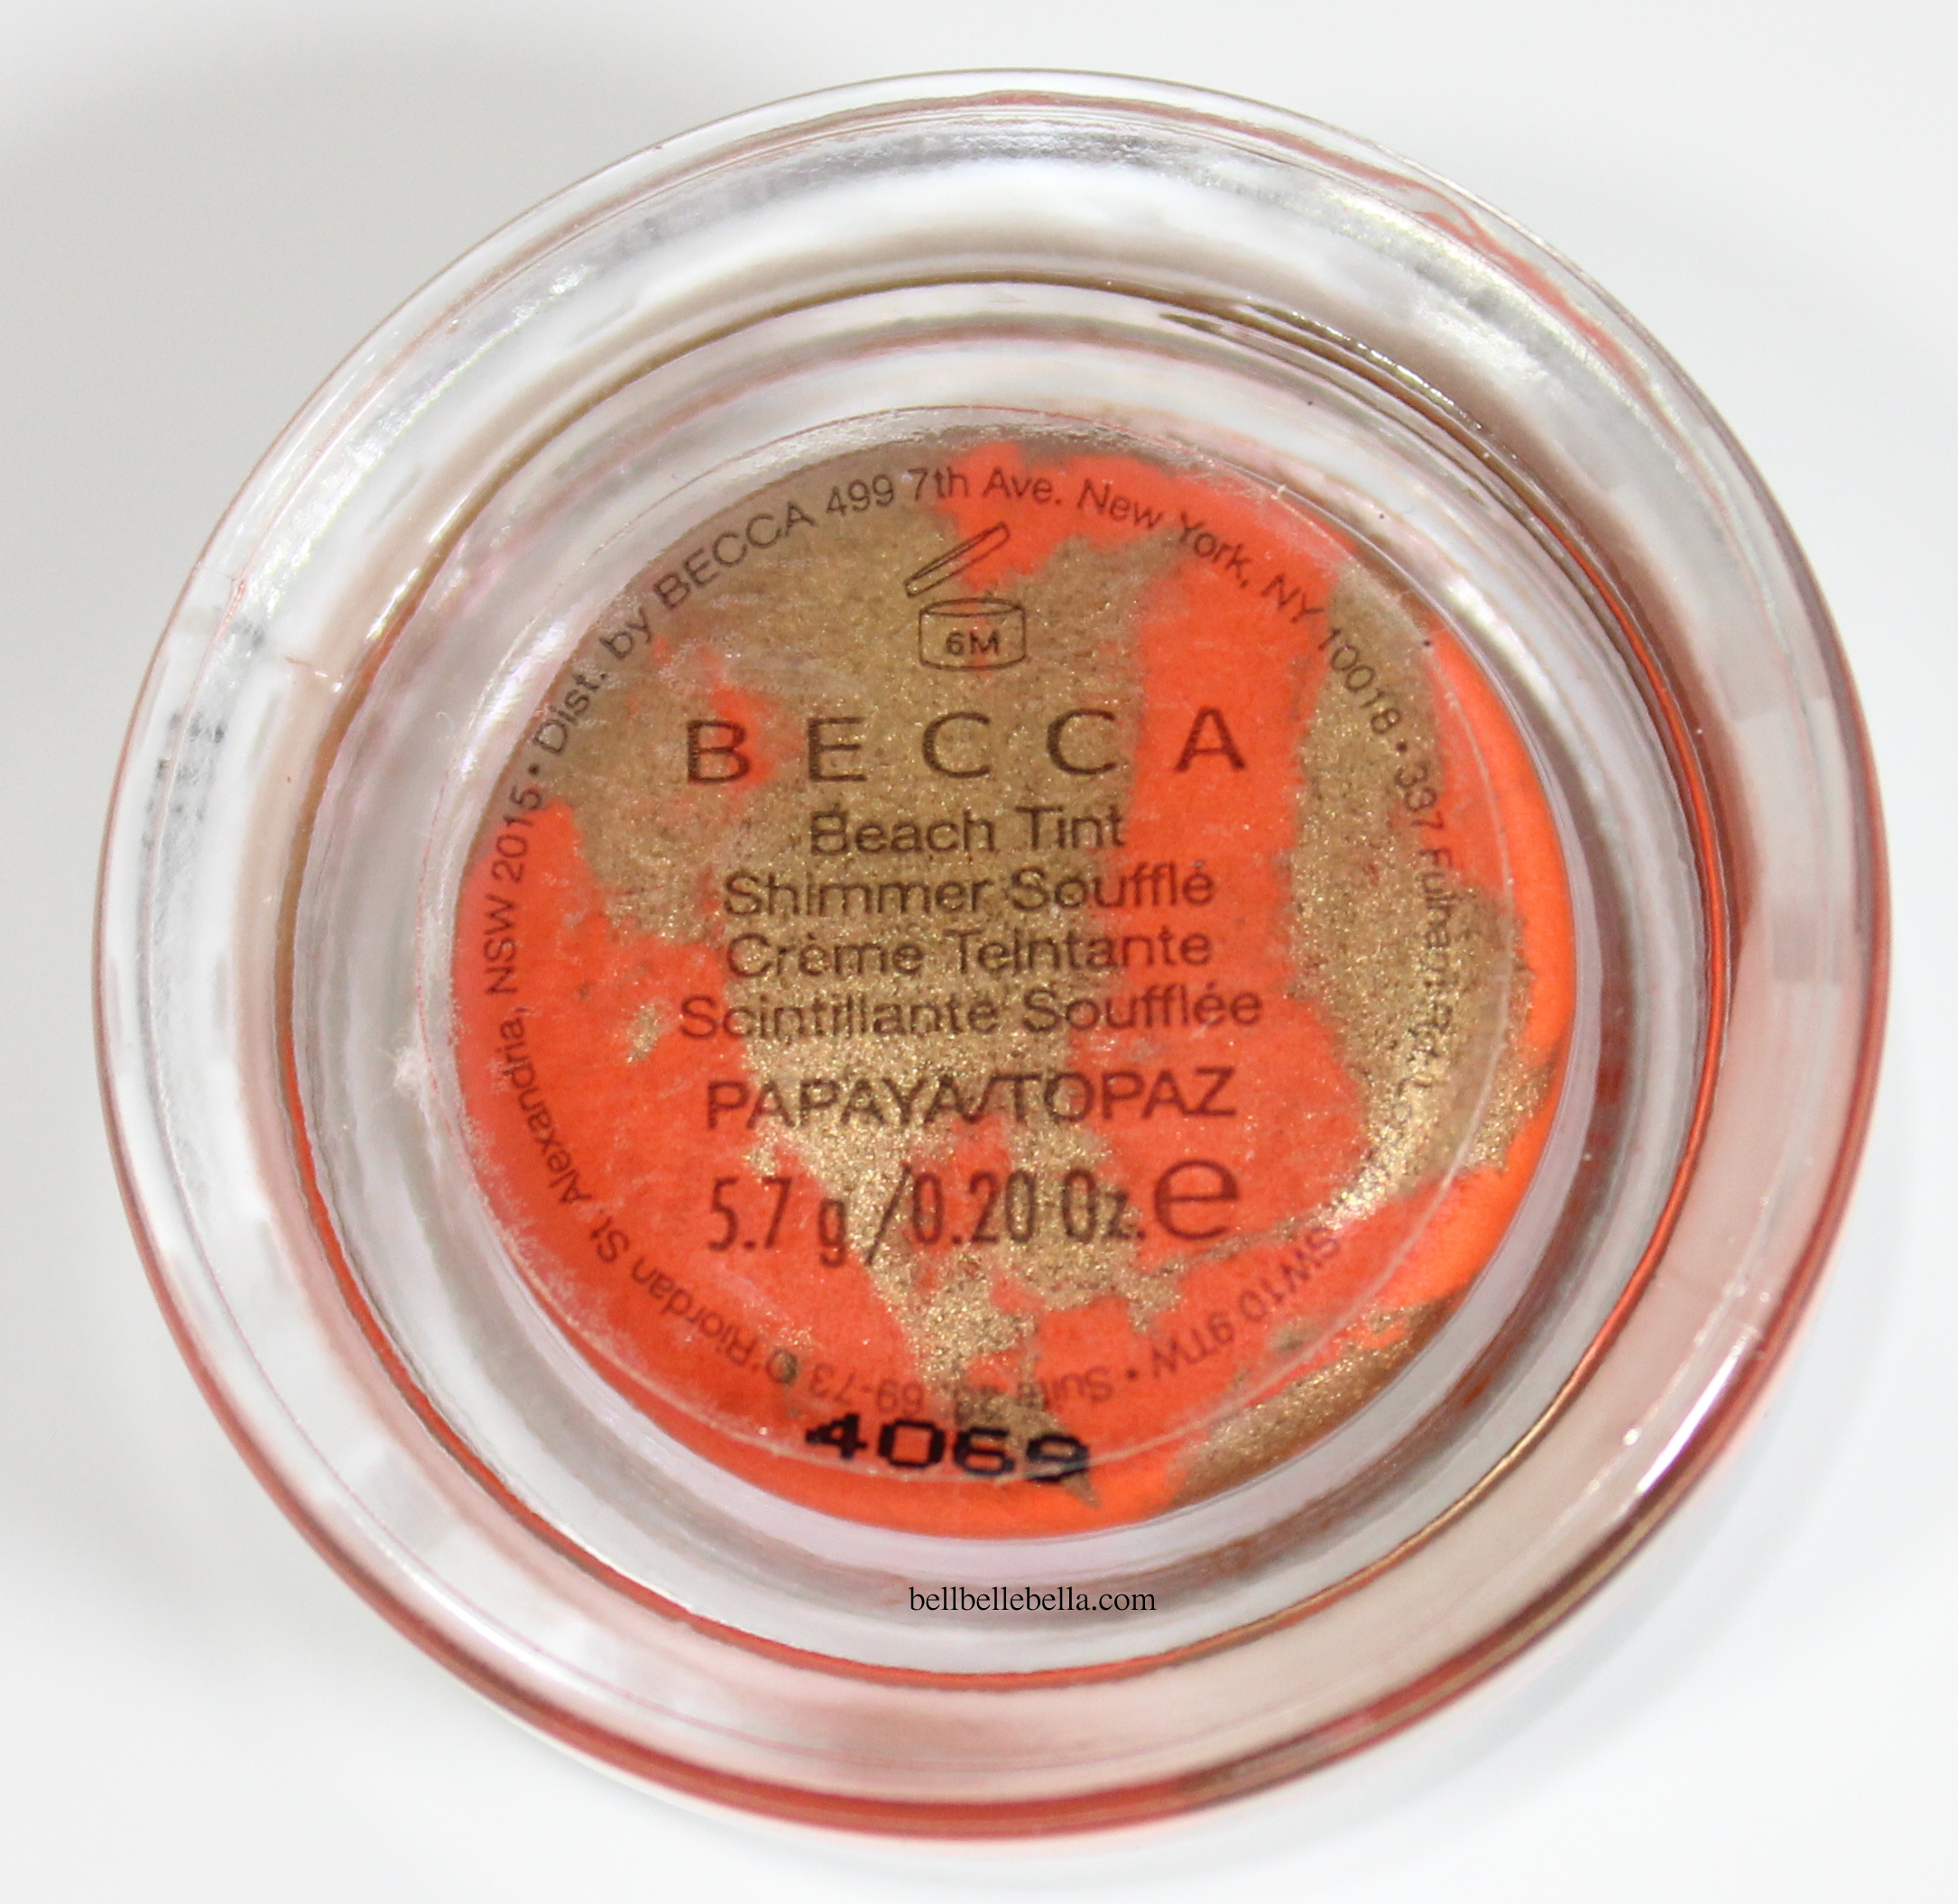 BECCA Beach Tint Shimmer Souffle in Papaya/Topaz Review and Swatches graphic